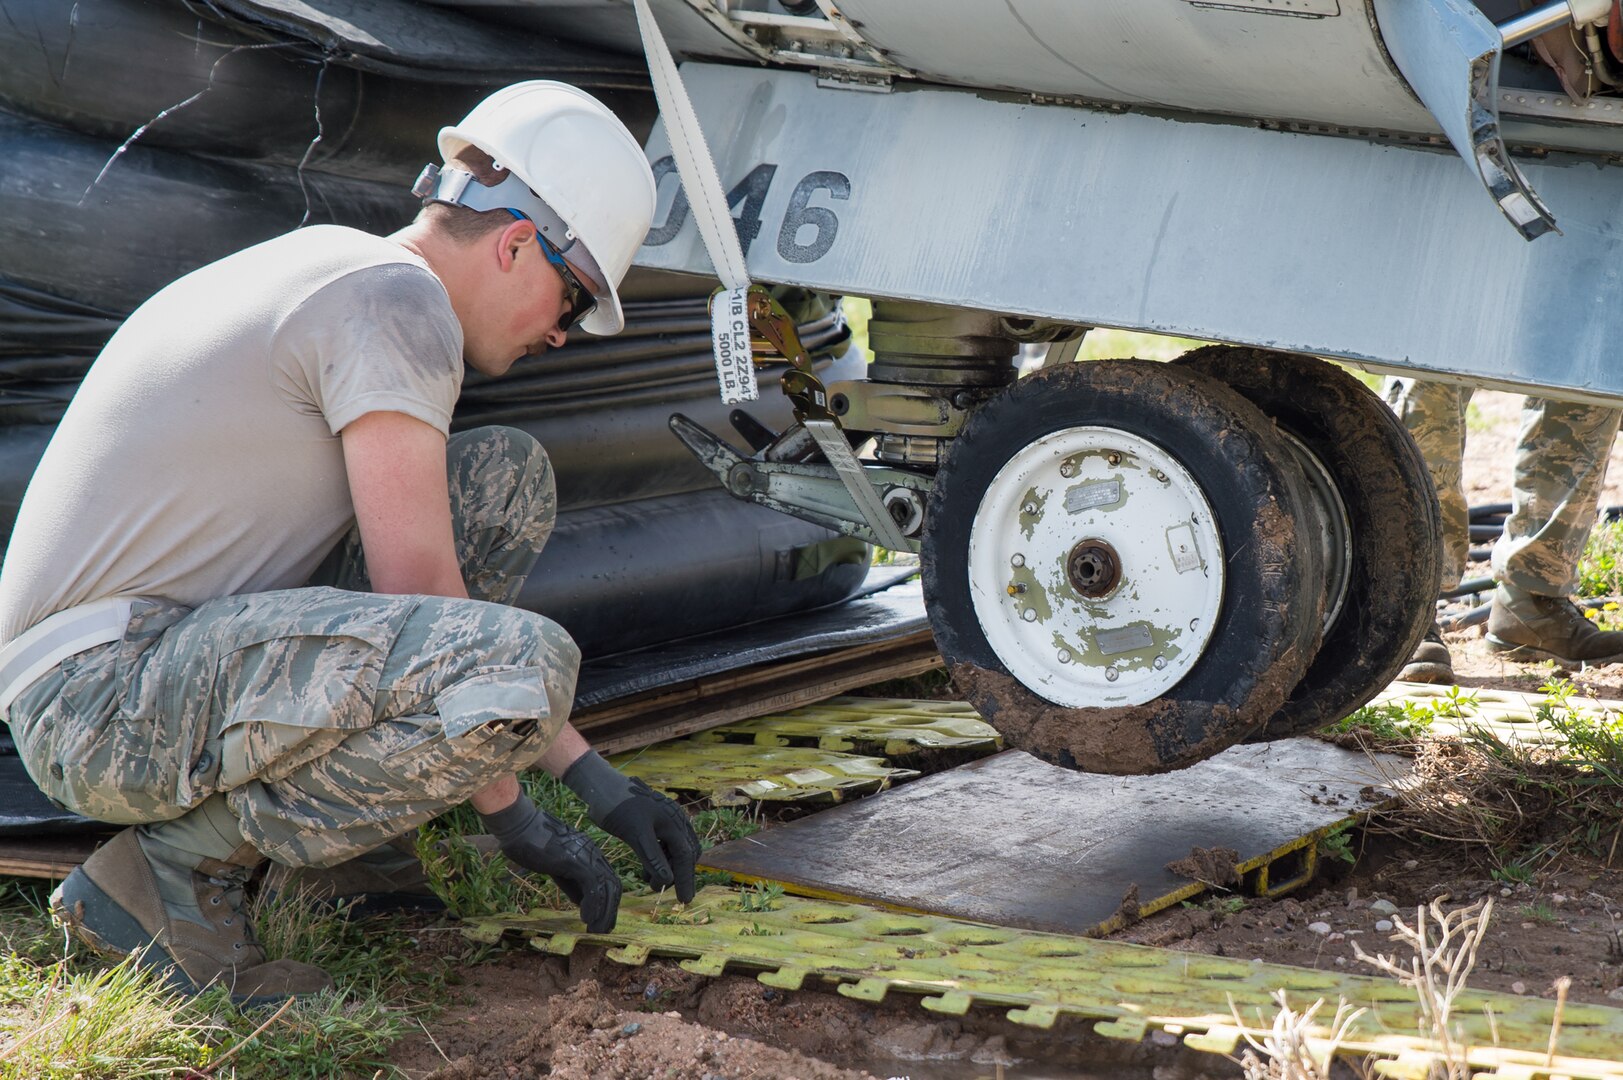 U.S. Air Force Staff Sgt. Ronald Bahre with the 153rd Maintenance Group's Crash Damage or Disabled Aircraft Recovery team places steel planking beneath the front landing gear of an A-7 Corsair II aircraft, May 11, 2017 in Cheyenne, Wyoming. Maintainers from all aircraft specialties practiced moving a fighter aircraft from the mud into a parking spot as part of an annual CDDAR requirement. (U.S. Air National Guard photo by Senior Master Sgt. Charles Delano/released)